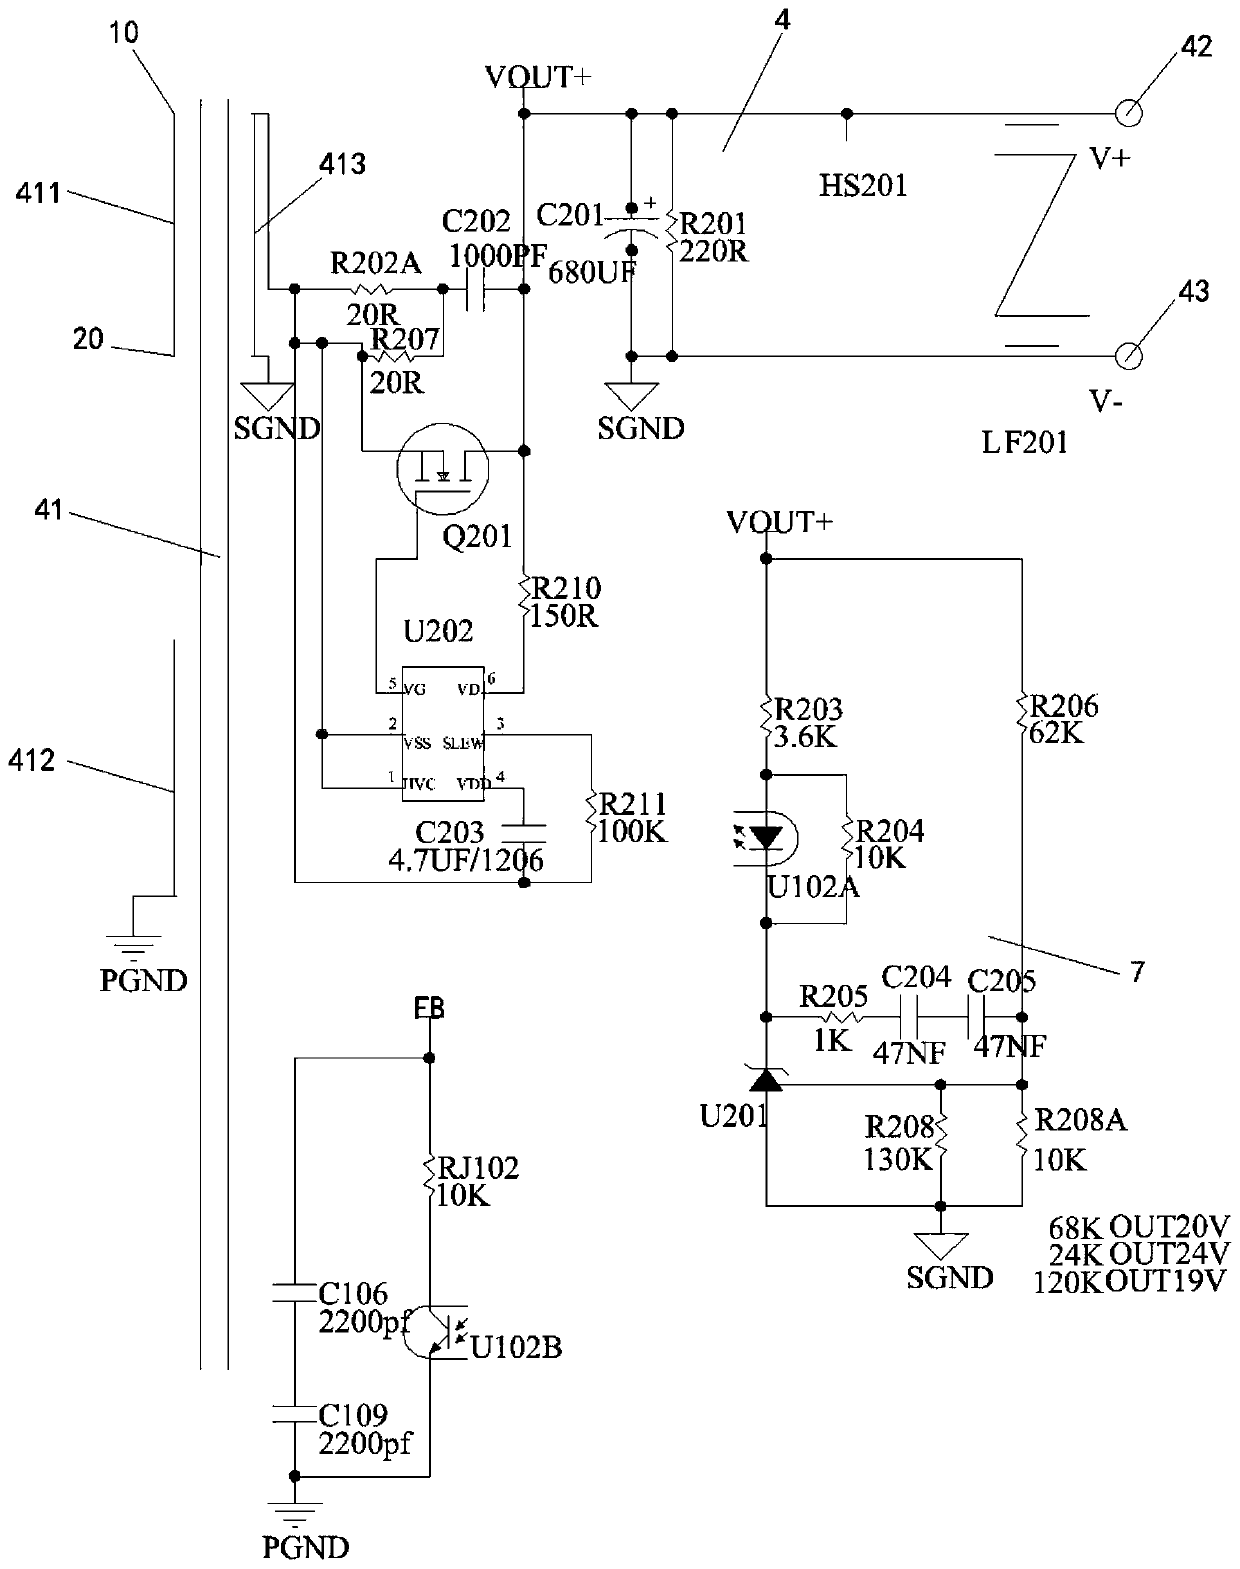 Power supply circuit for suppressing startup instantaneous impulse current